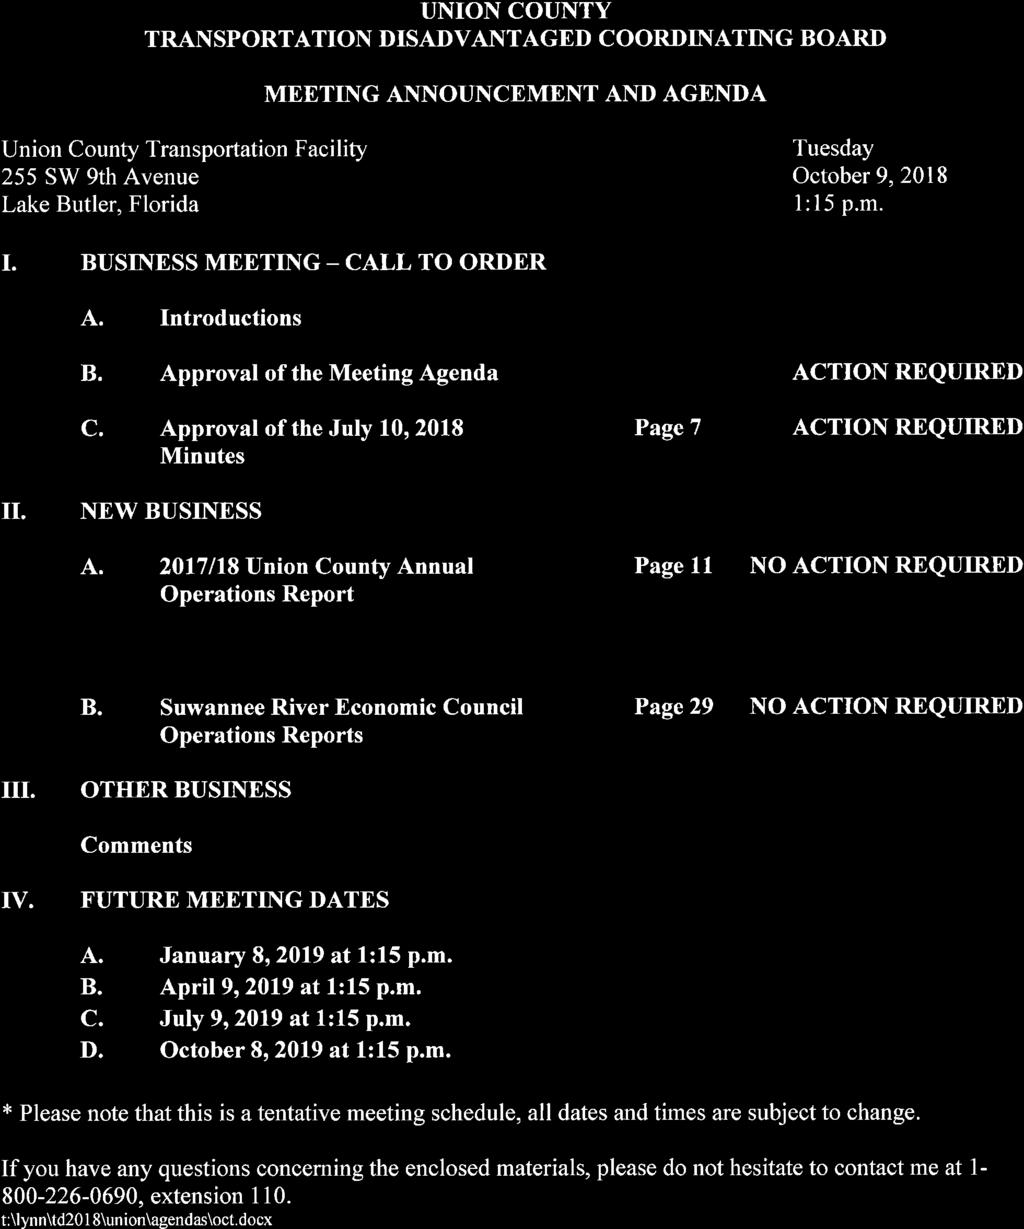 217/18 Union County Annual Operations Report Page 11 NO ACTON REQURED The Board needs to re iew the 217 18 Union County Annual Operations R port B.